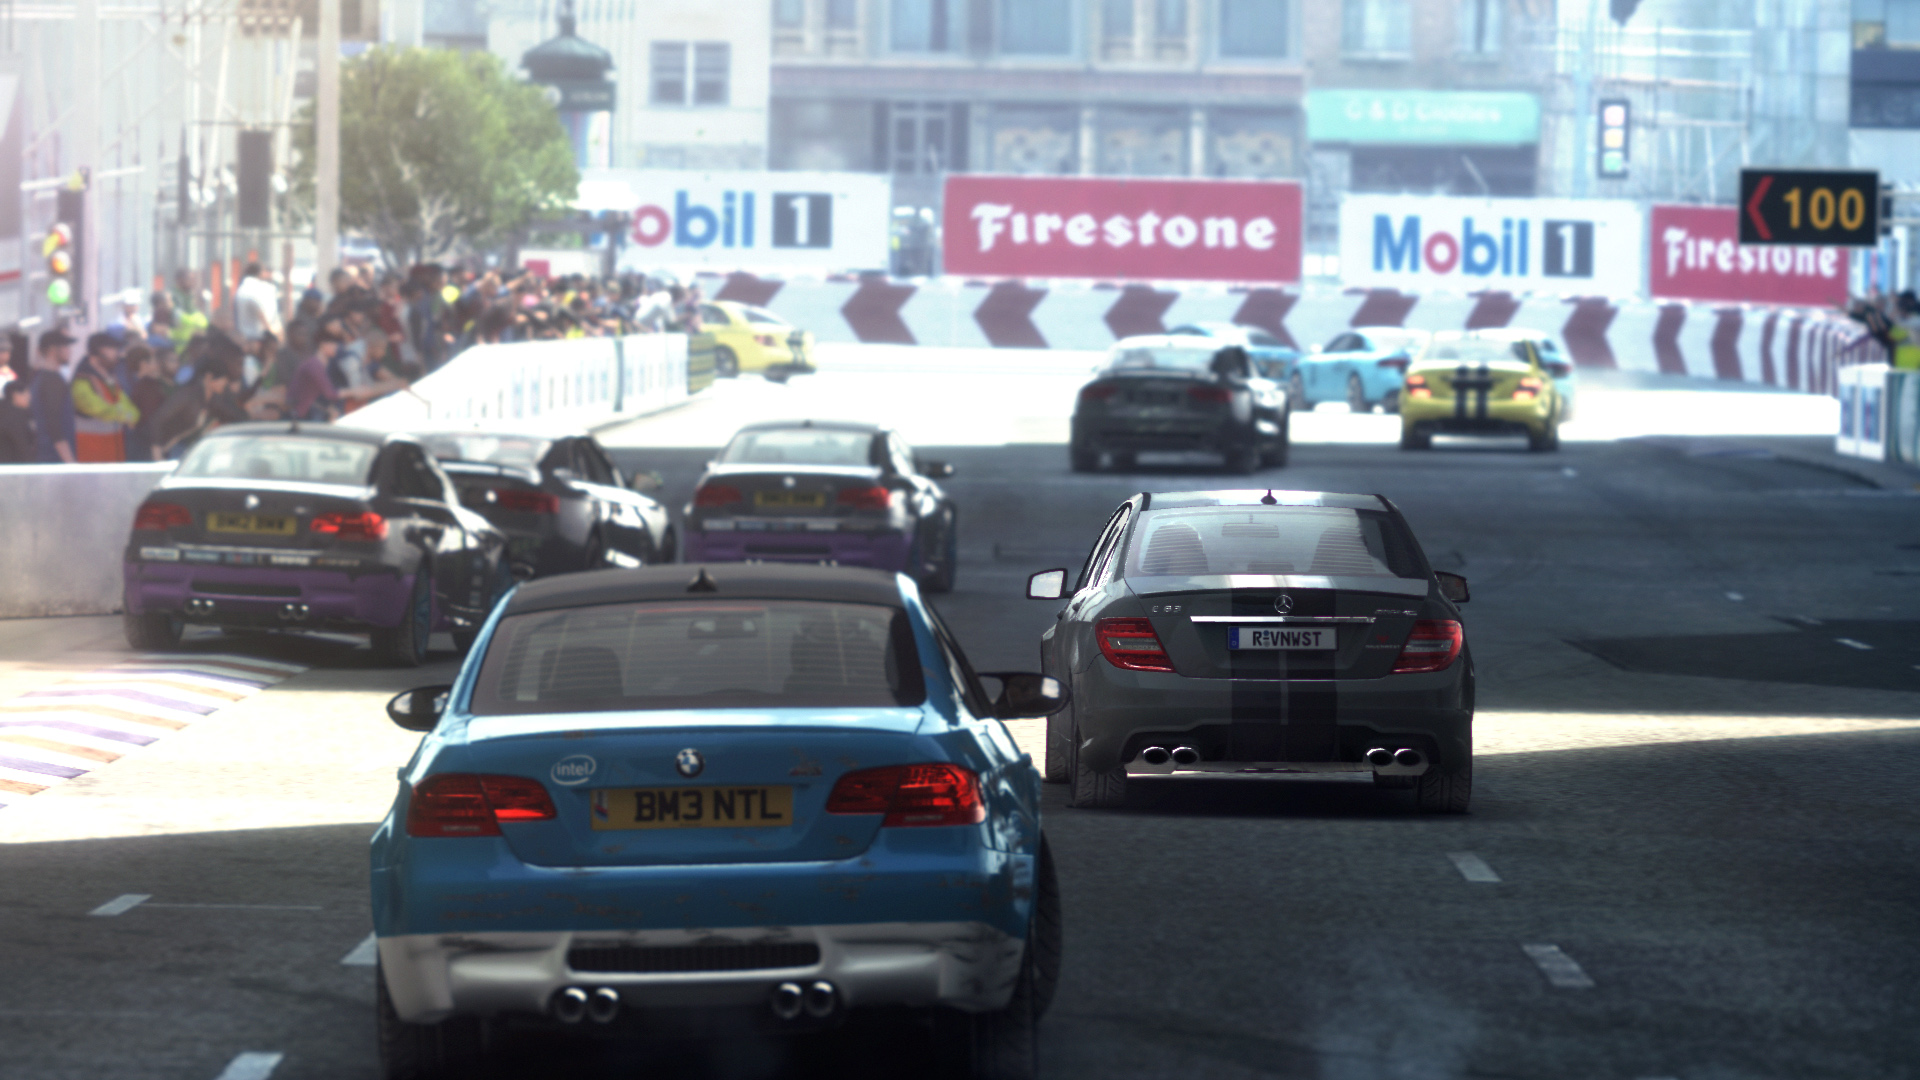 Video Game GRID Autosport HD Wallpaper | Background Image